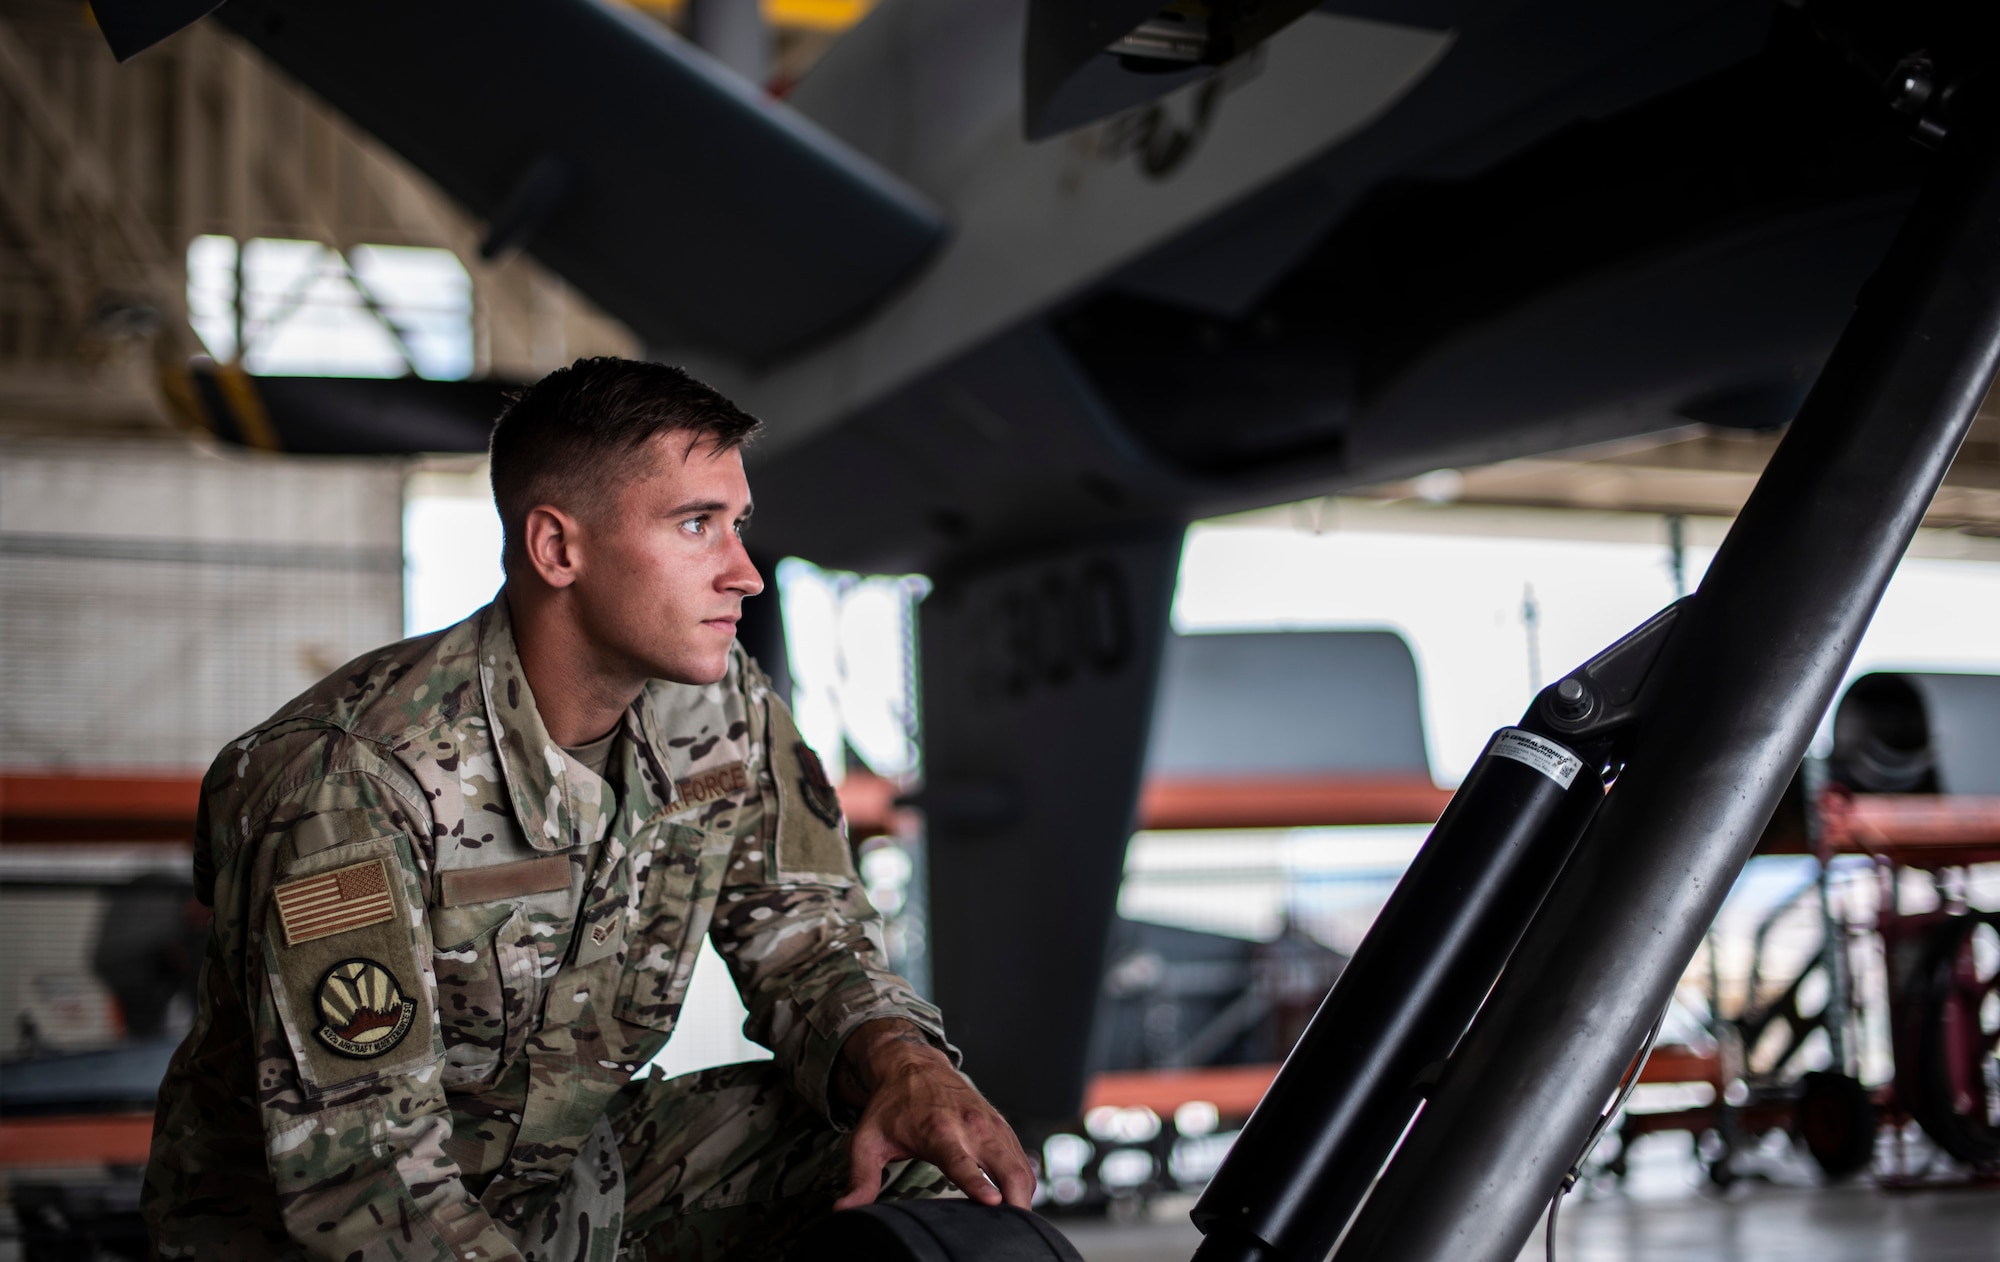 Senior Airman Levi looks up into the distance while under an MQ-9 Reaper.